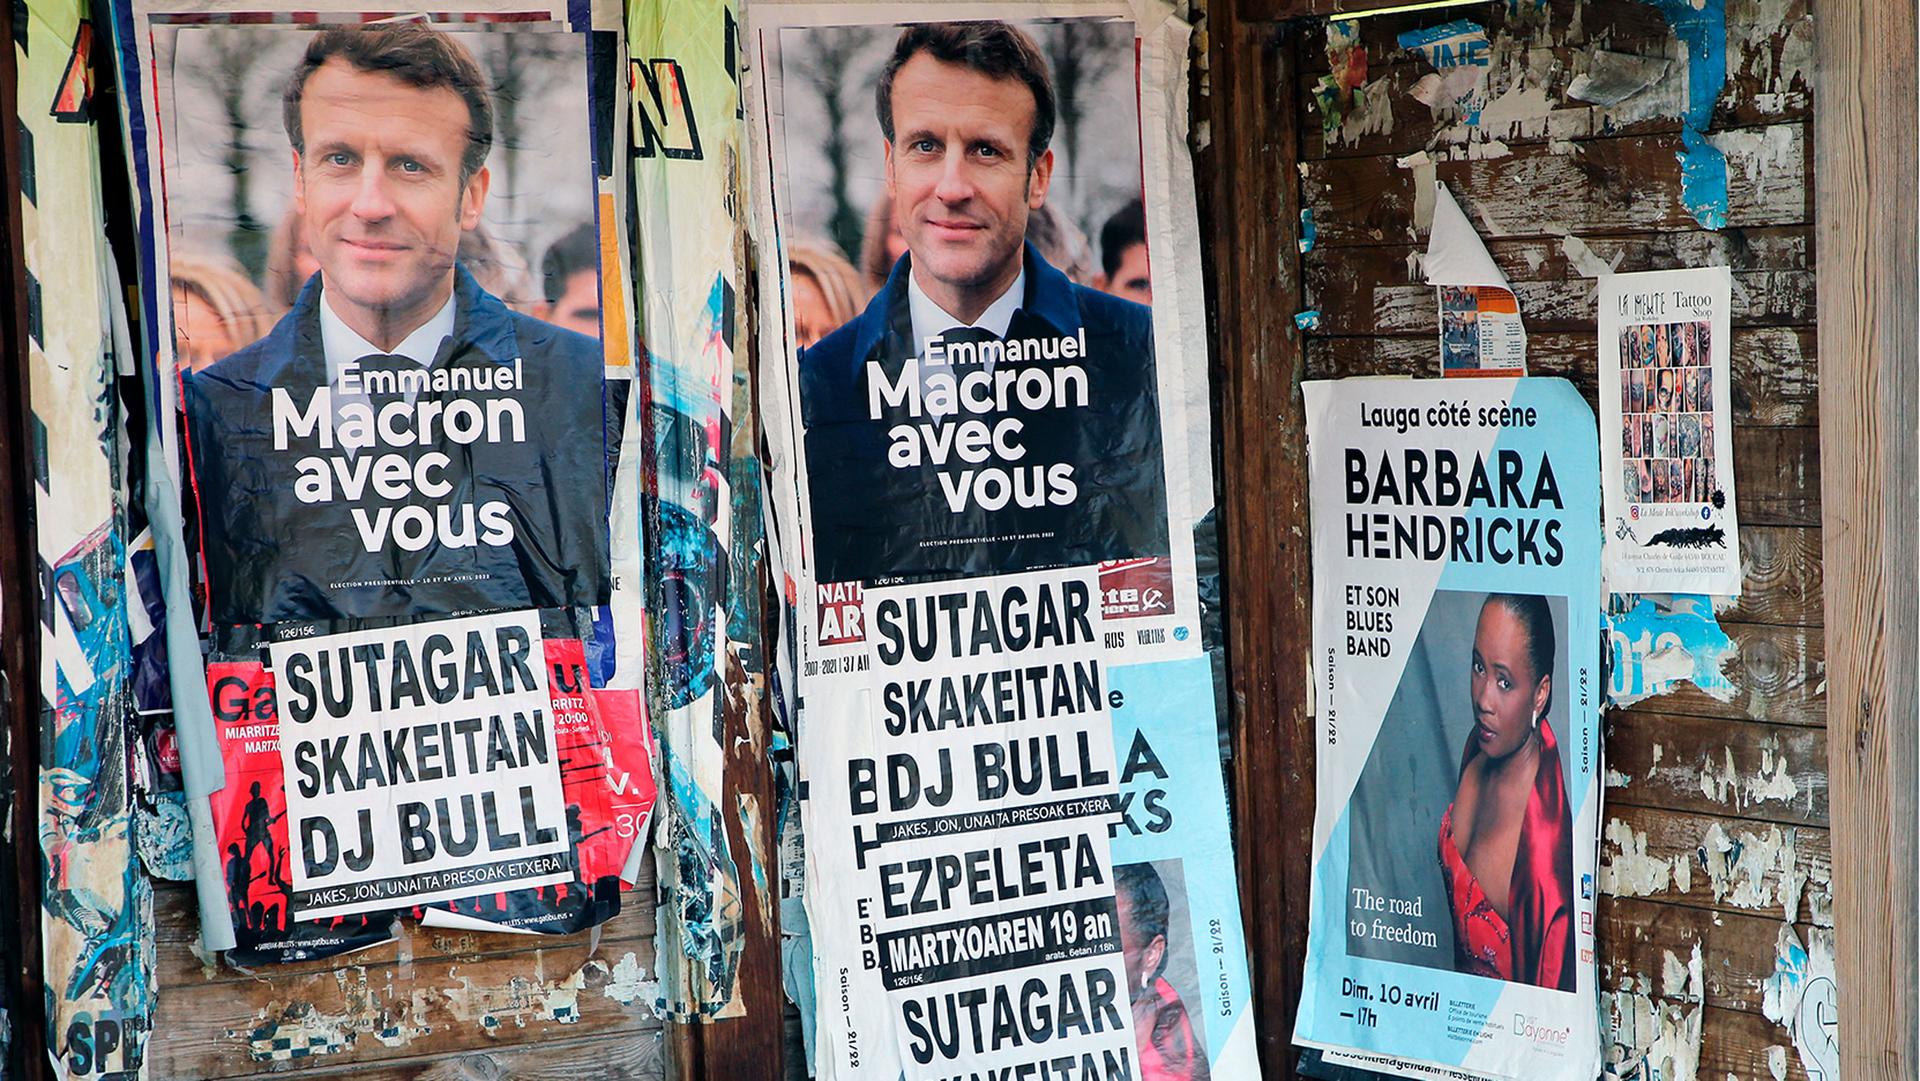 Posters of French President Emmanuel Macron and centrist candidate for reelection in Saint Pee sur Nivelle, southwestern France